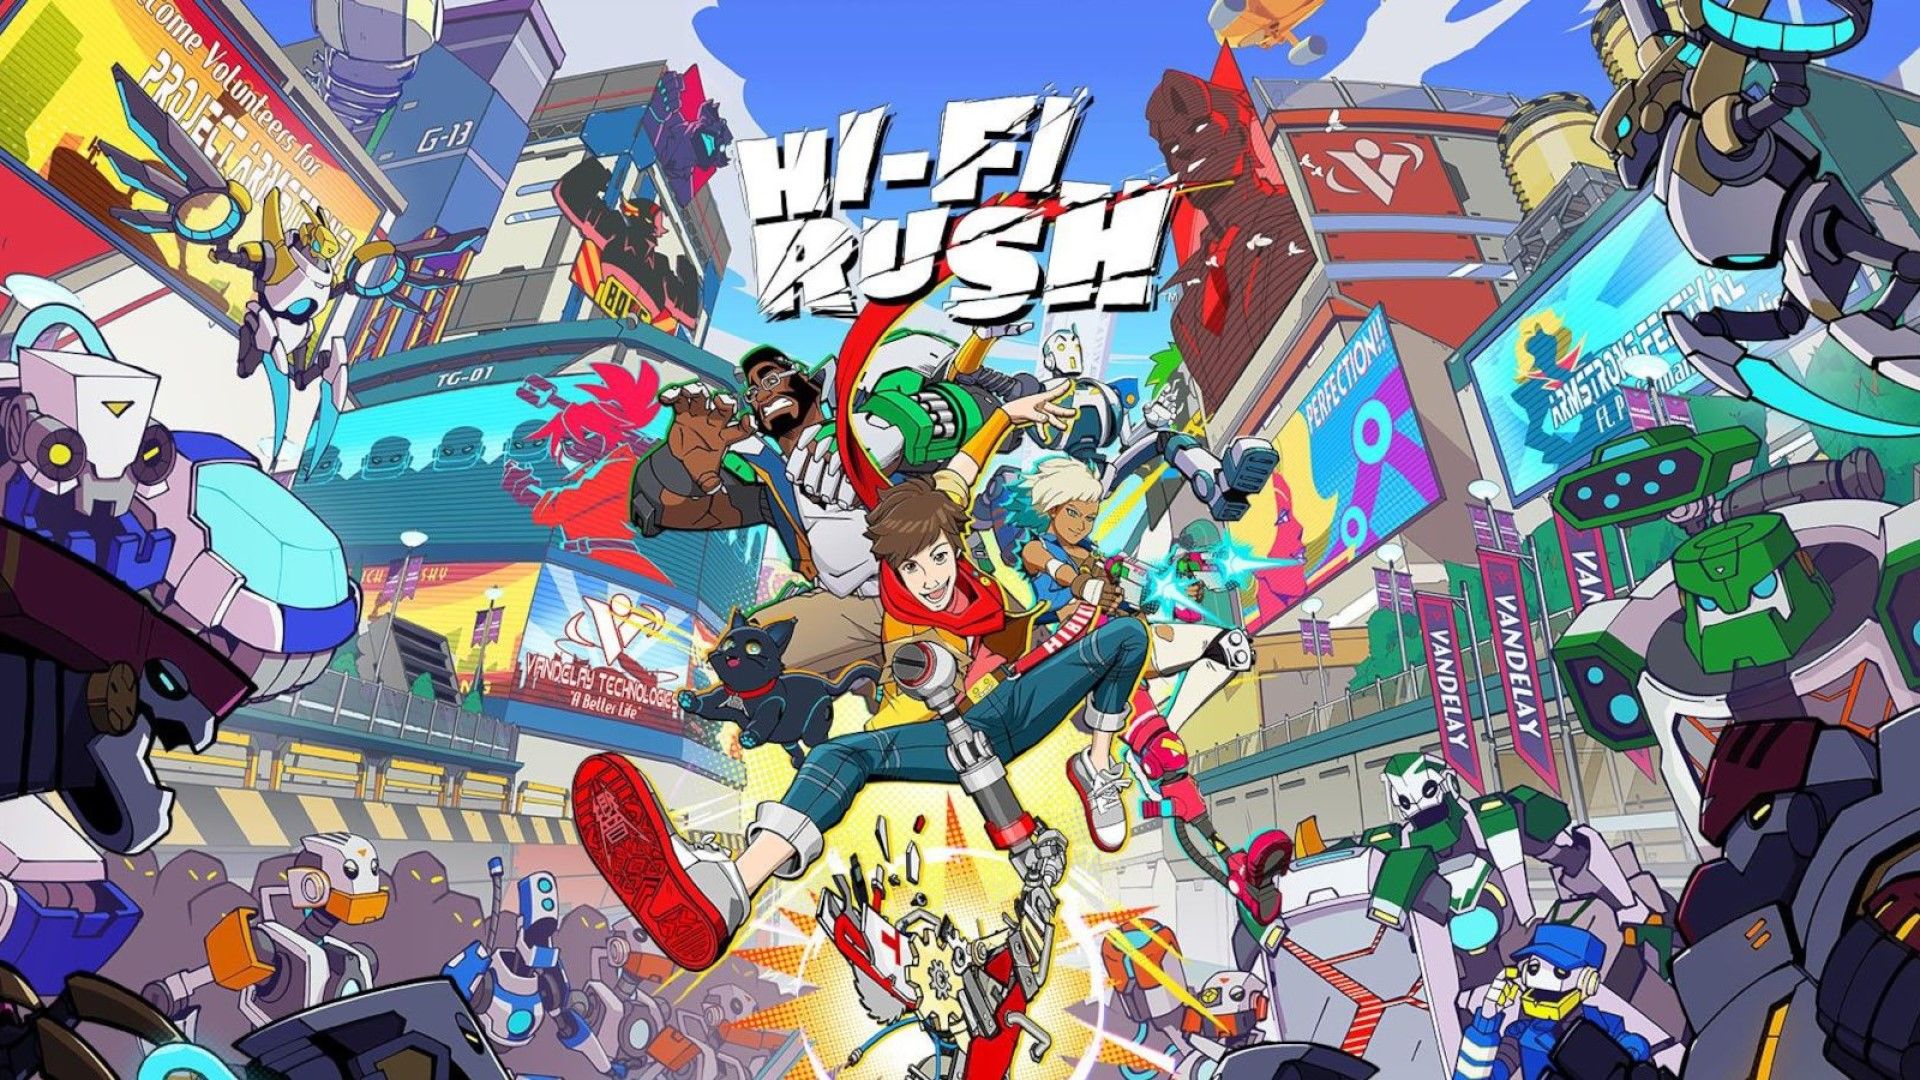 Hi-Fi RUSH Official: Bethesda’s New Xbox Game Is Now Available!  |  Xbox One